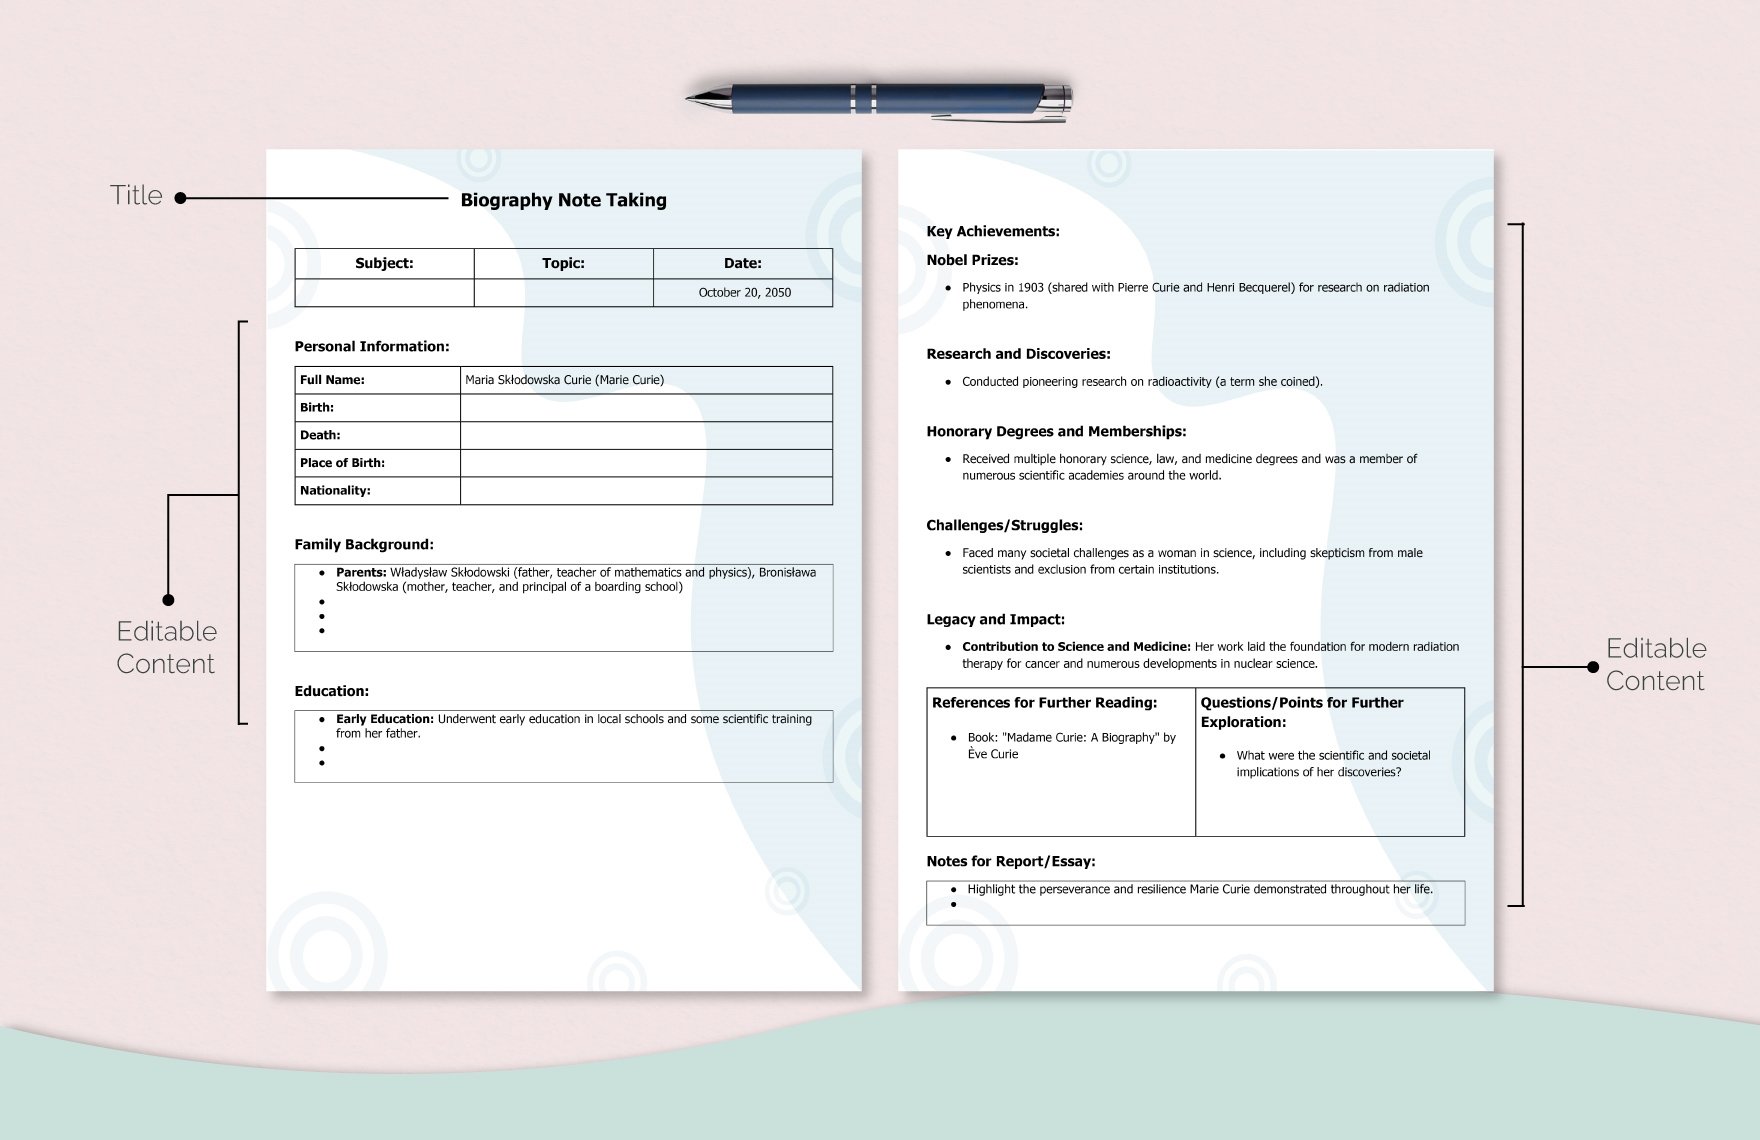 Biography Note Taking Template